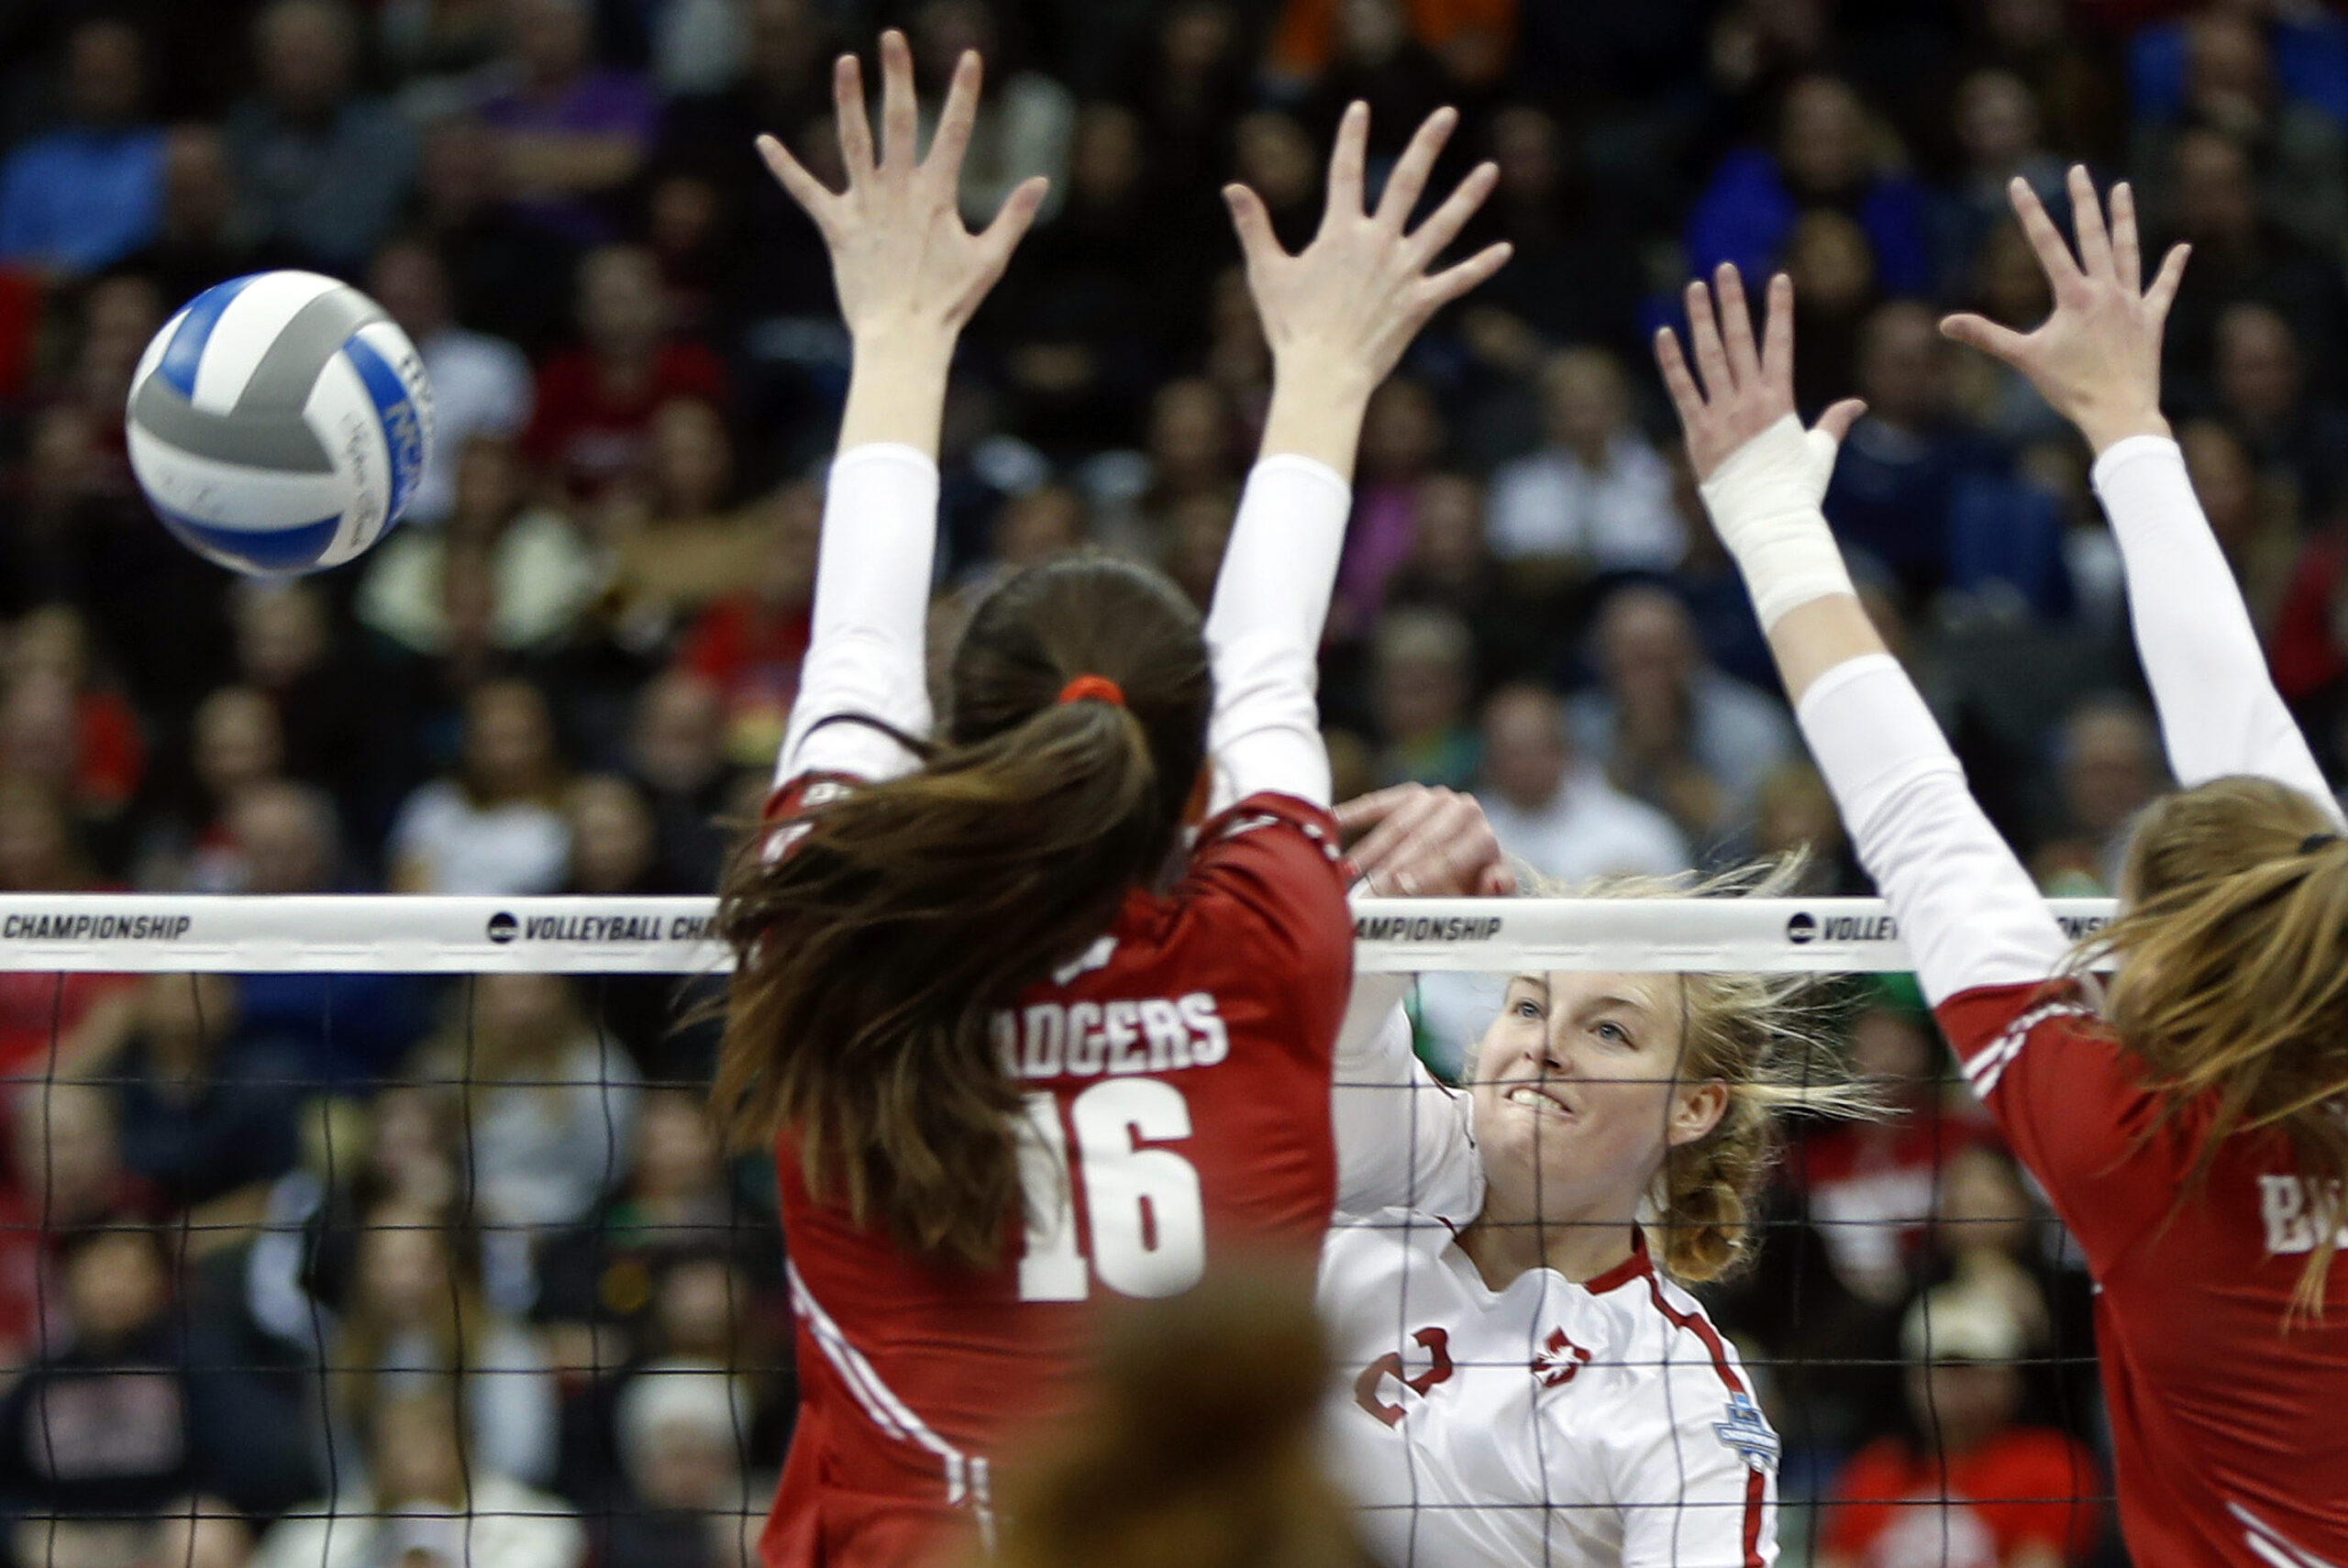 Kathryn Plummer of Stanford spikes the ball